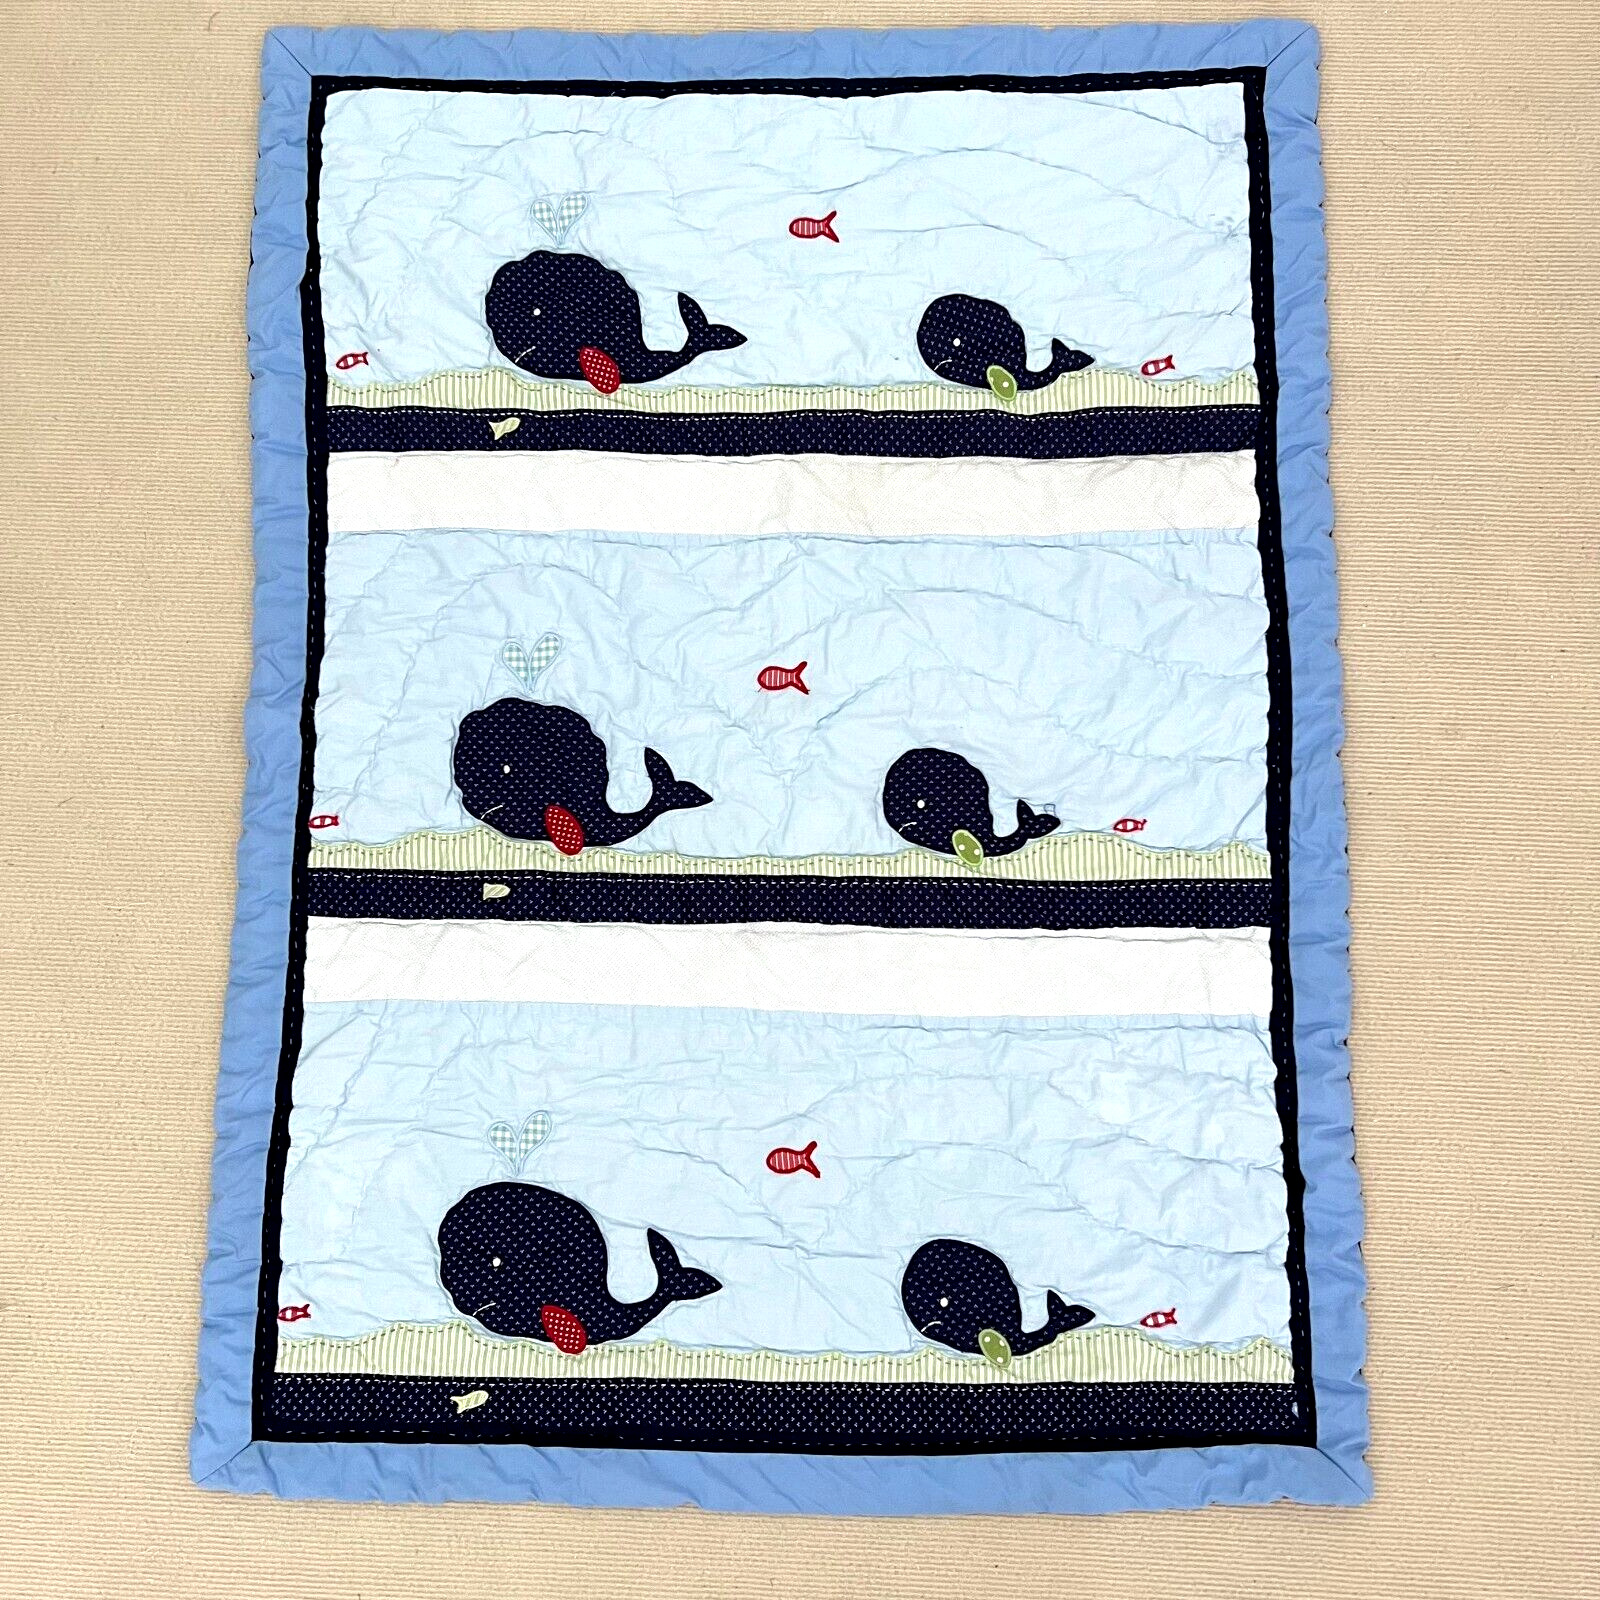 Handmade Happy Whales Embroidered Hand Stitch Baby/Toddler Cotton Crib Quilt